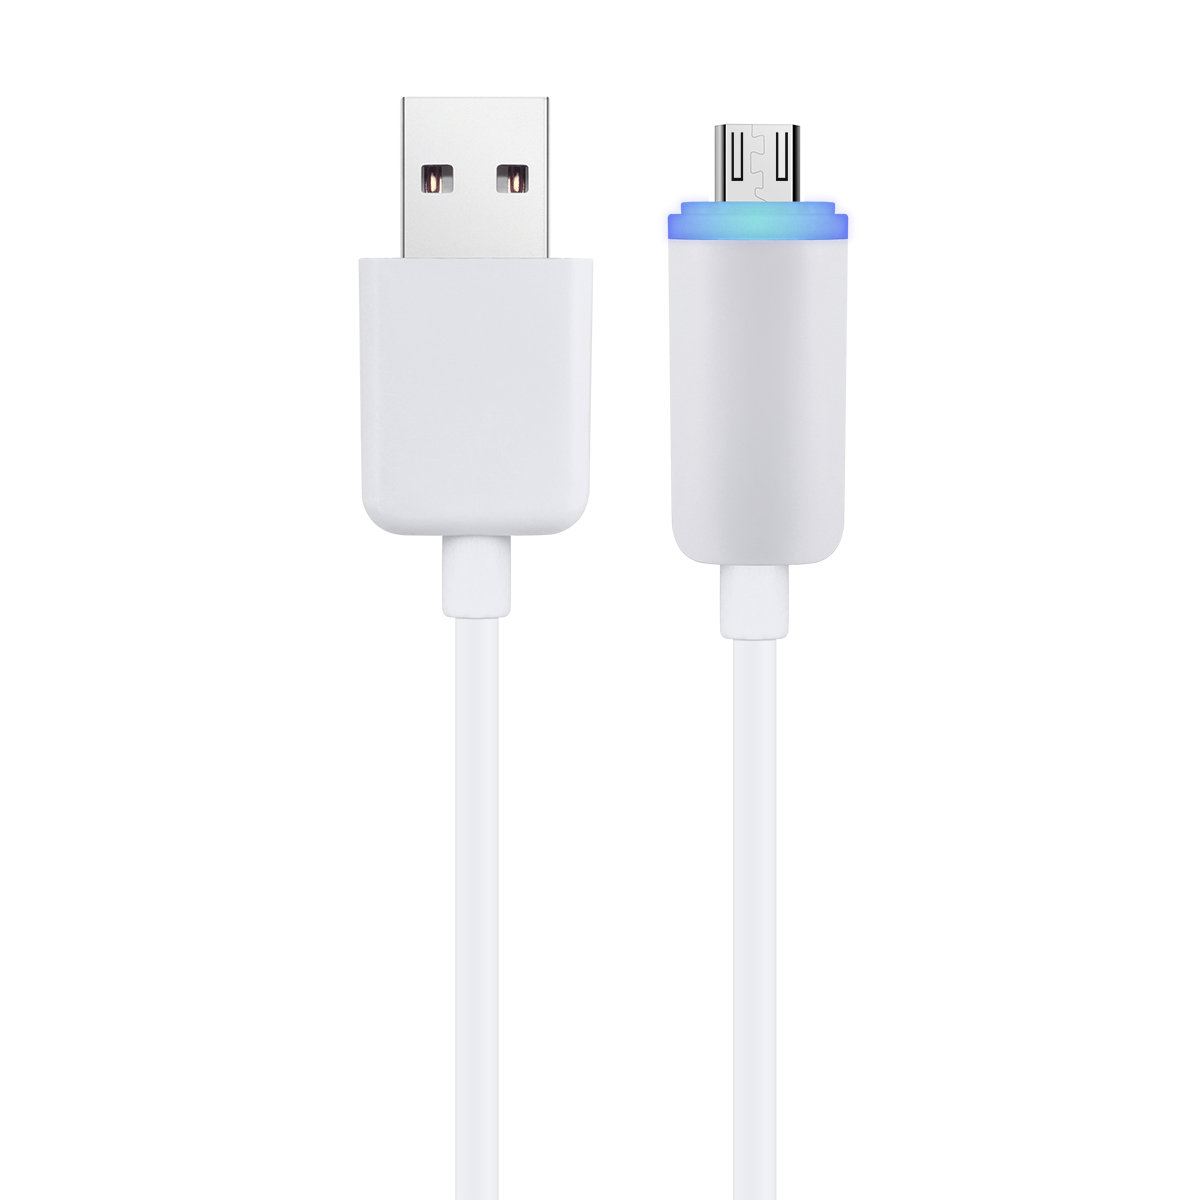 Micro USB Data Charge Cable with LED Light for Android Samsung HTC - White